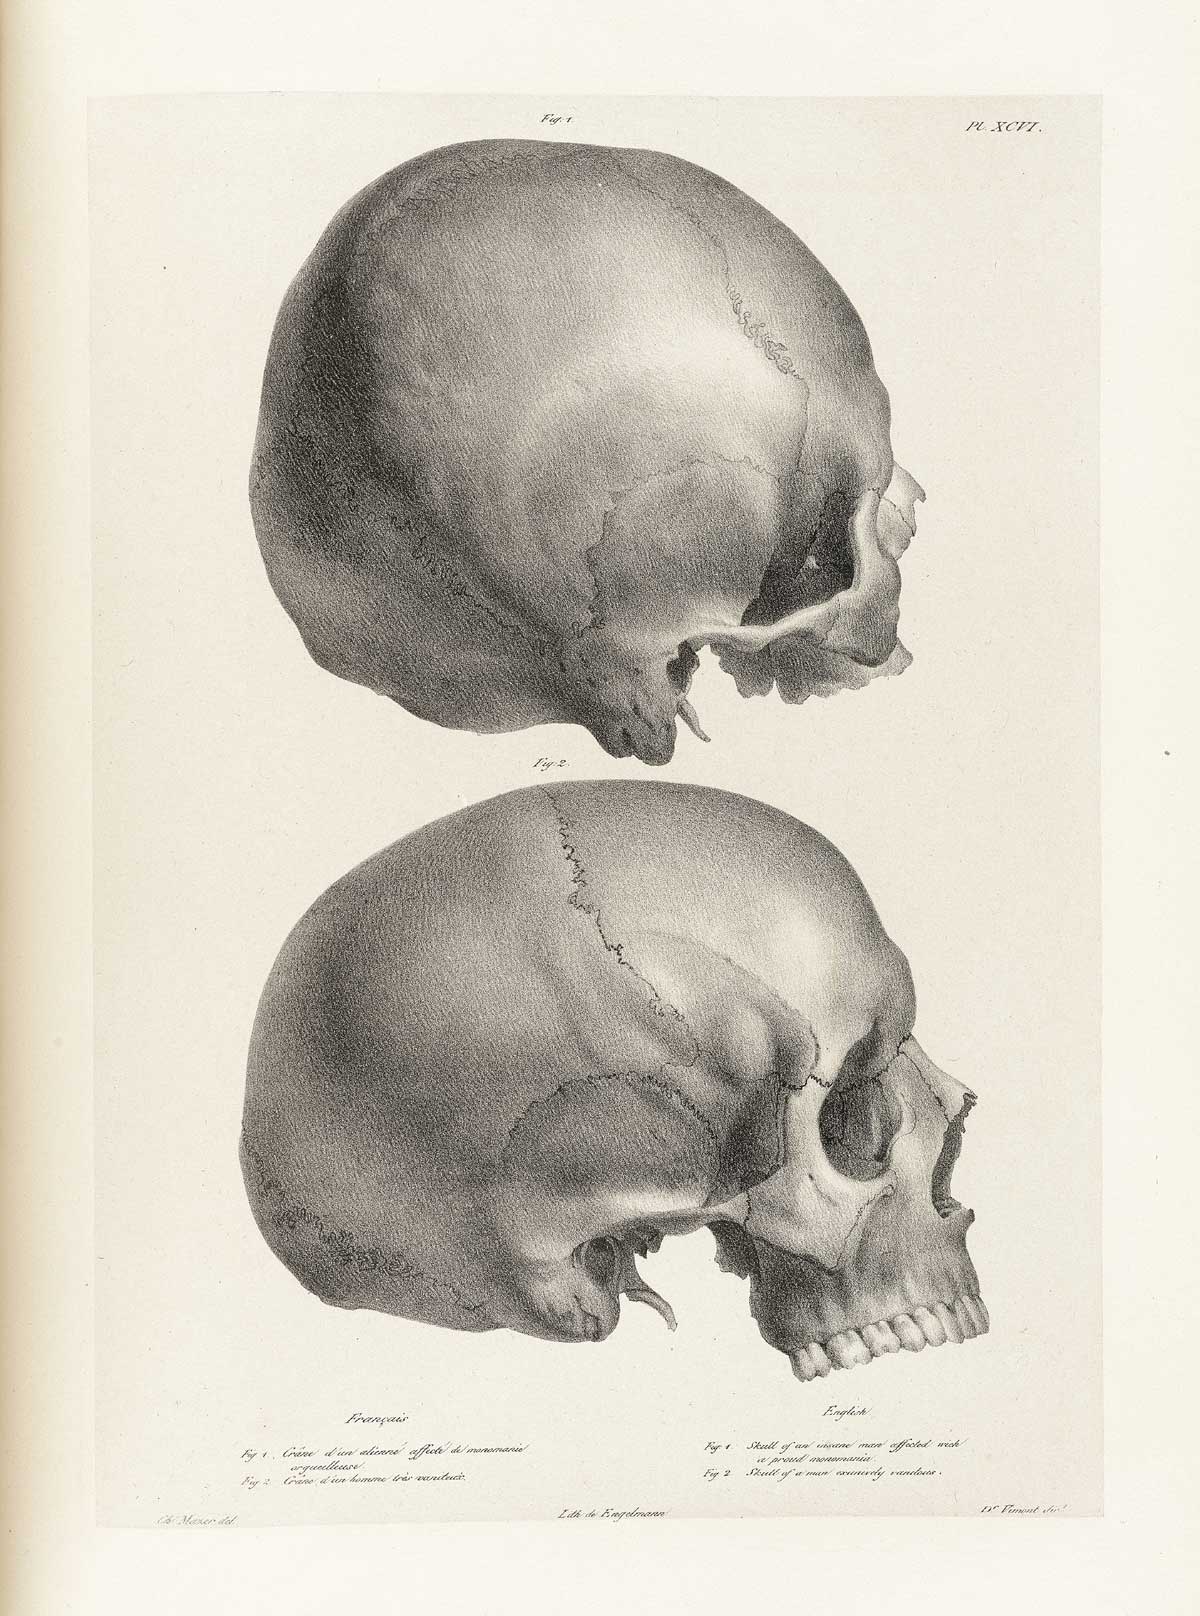 Table 96 of Joseph Vimont's Traité de phrénologie humaine et comparée, featuring the skull of an insane man affected with monomania and the skull of a conceited man.